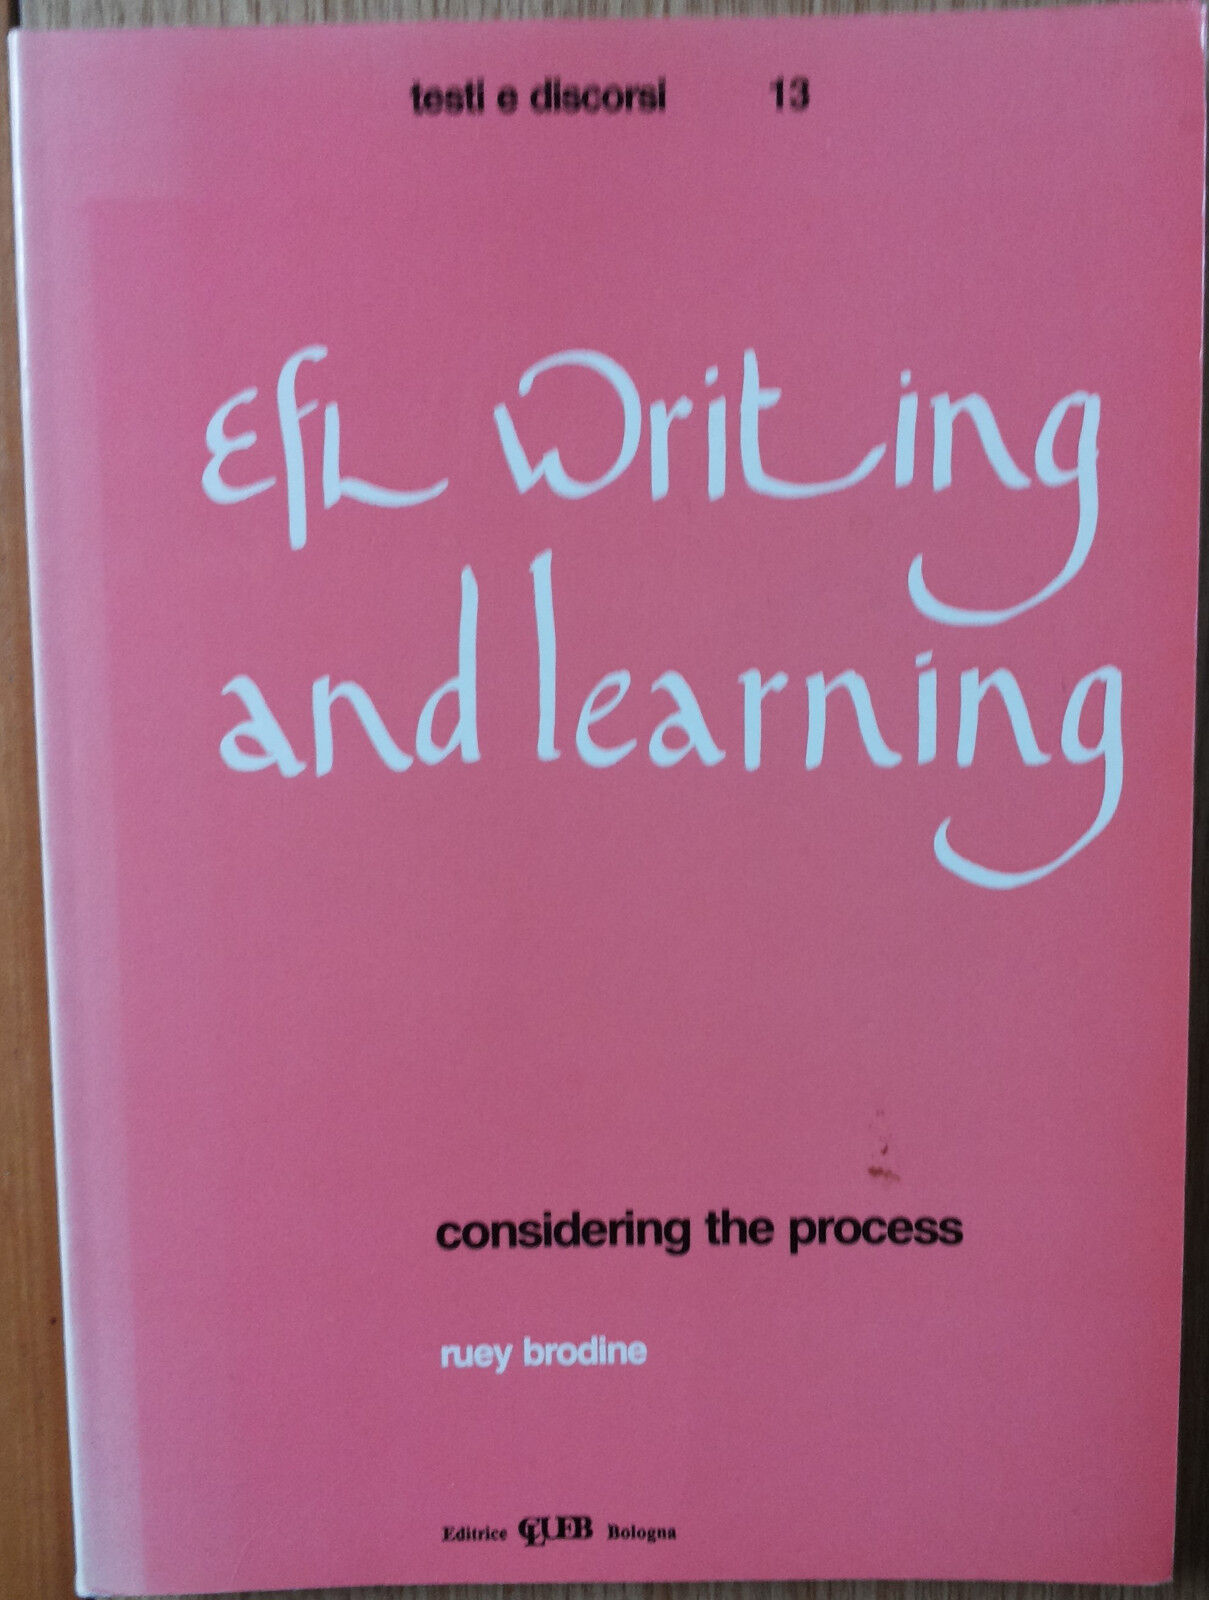 EFL writing and learning considering the process - Brodine - CLUEB,1990 - R libro usato